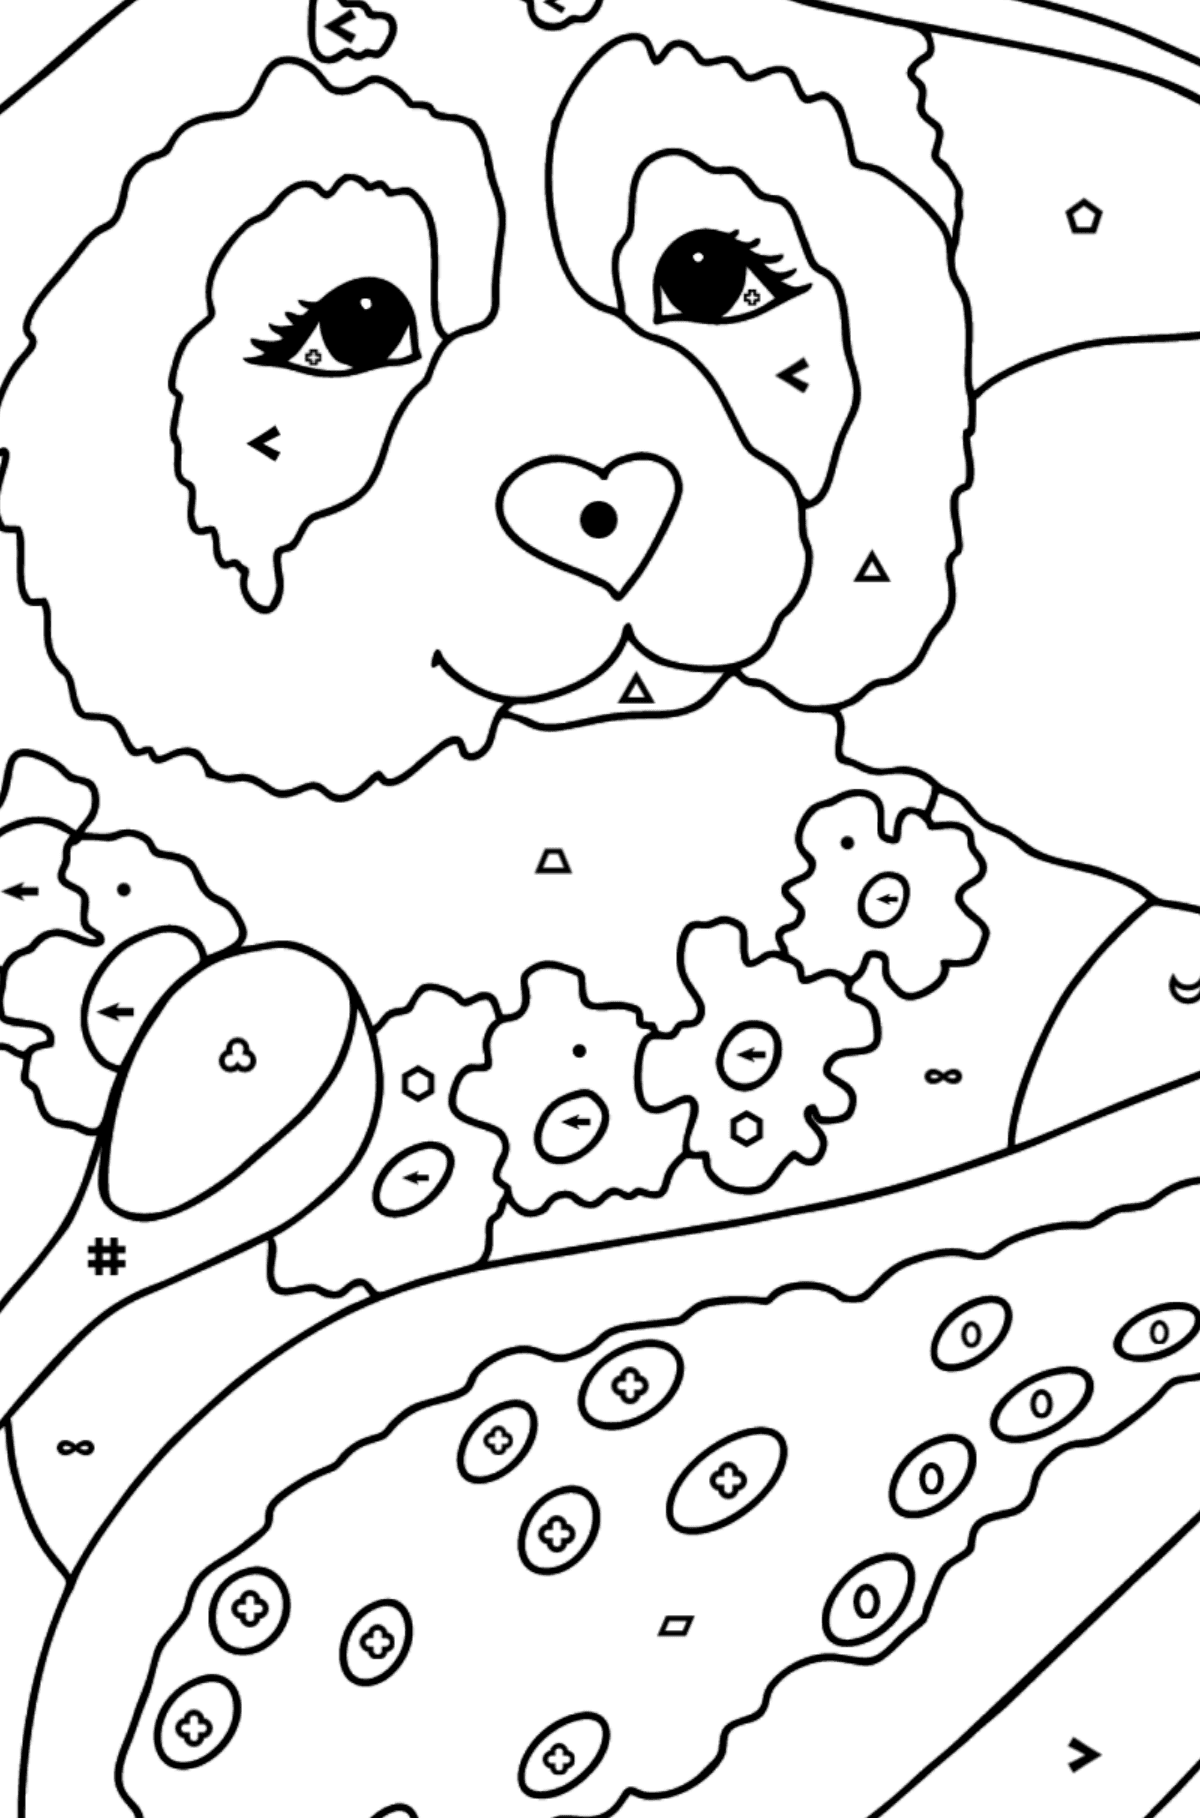 Cute Panda (Difficult) coloring page - Coloring by Symbols and Geometric Shapes for Kids